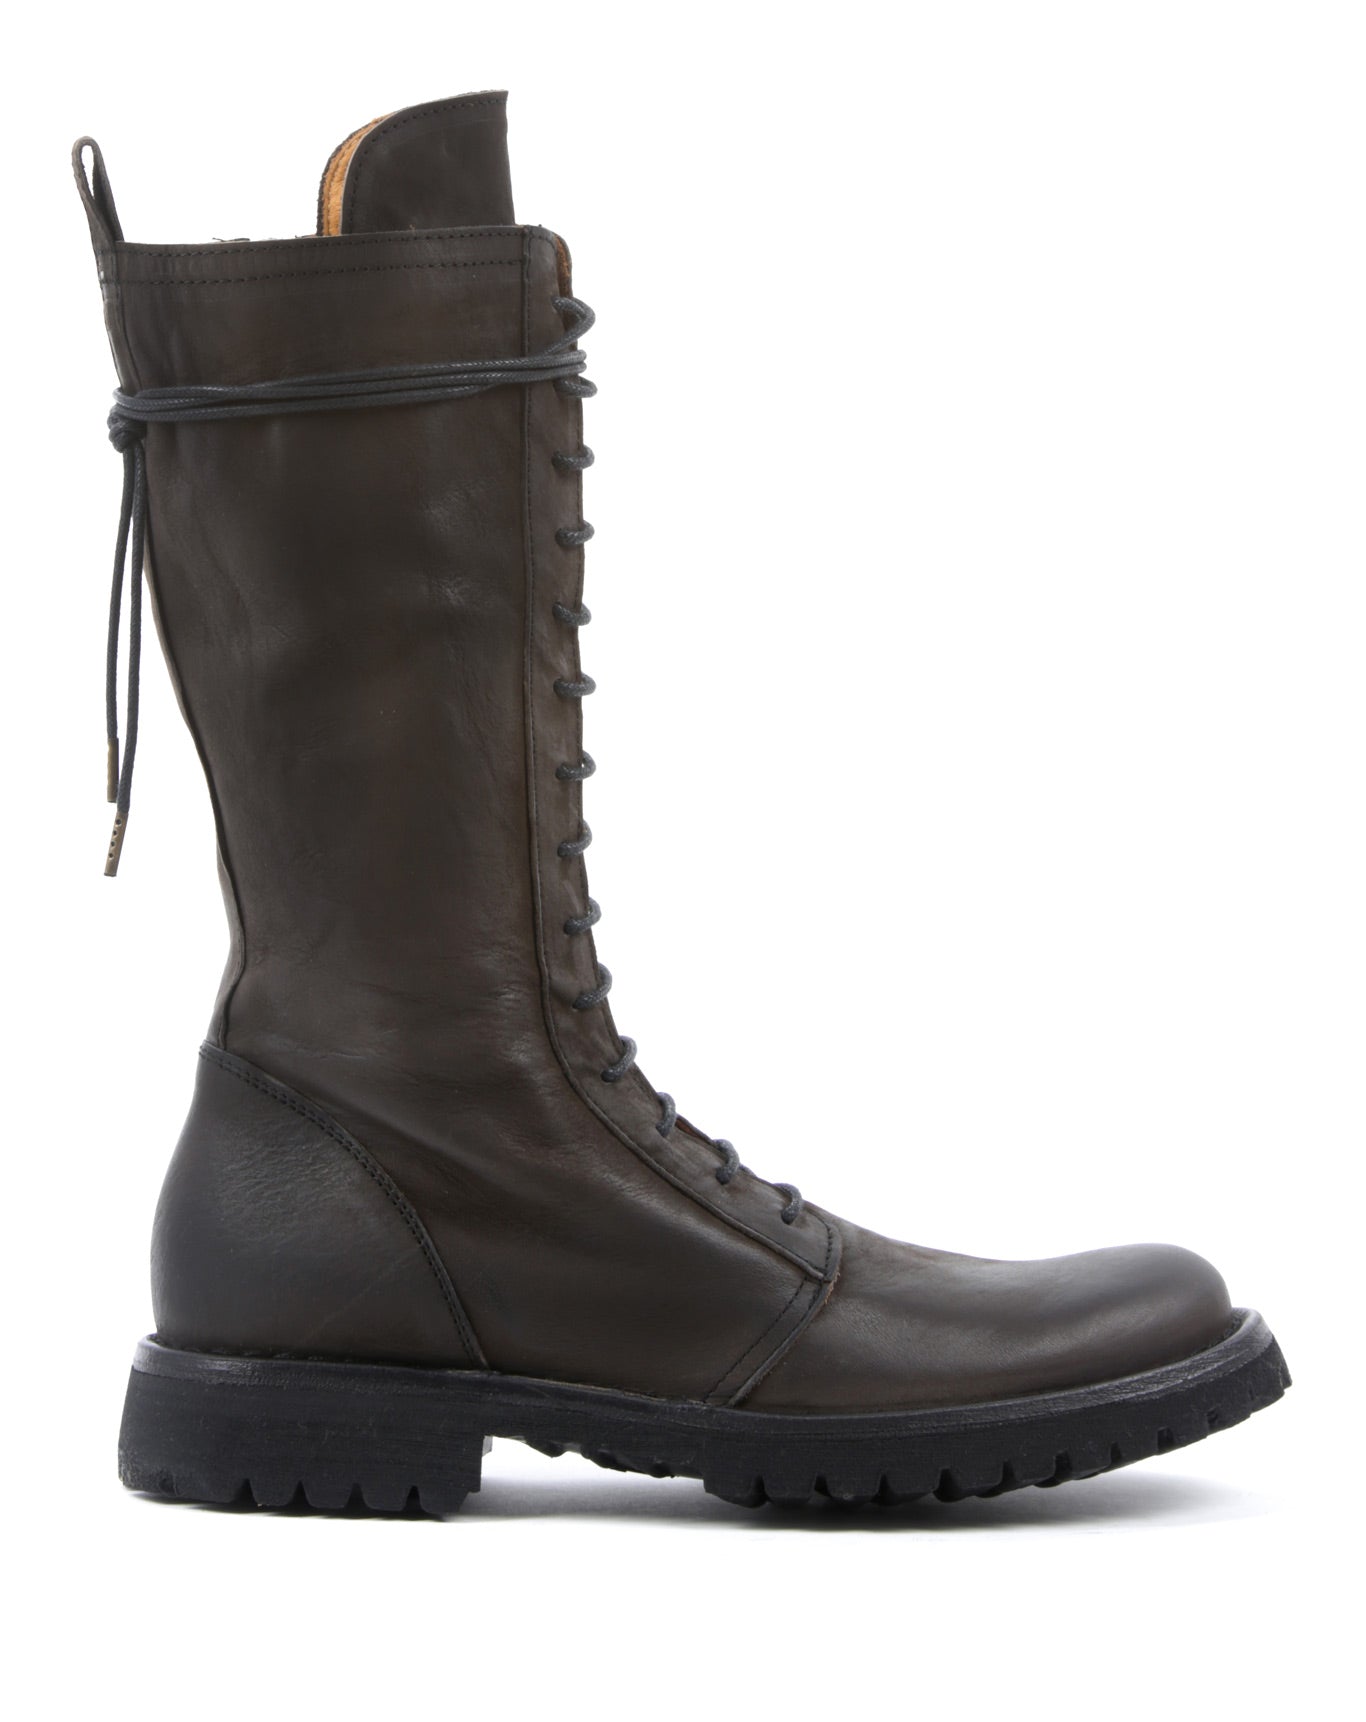 FIORENTINI + BAKER, ETERNITY MASSIVE M-EGAN, Tall distinctive lace up military style boots with robust sole. Handcrafted with natural leather by skilled artisans. Made in Italy. Made to last.